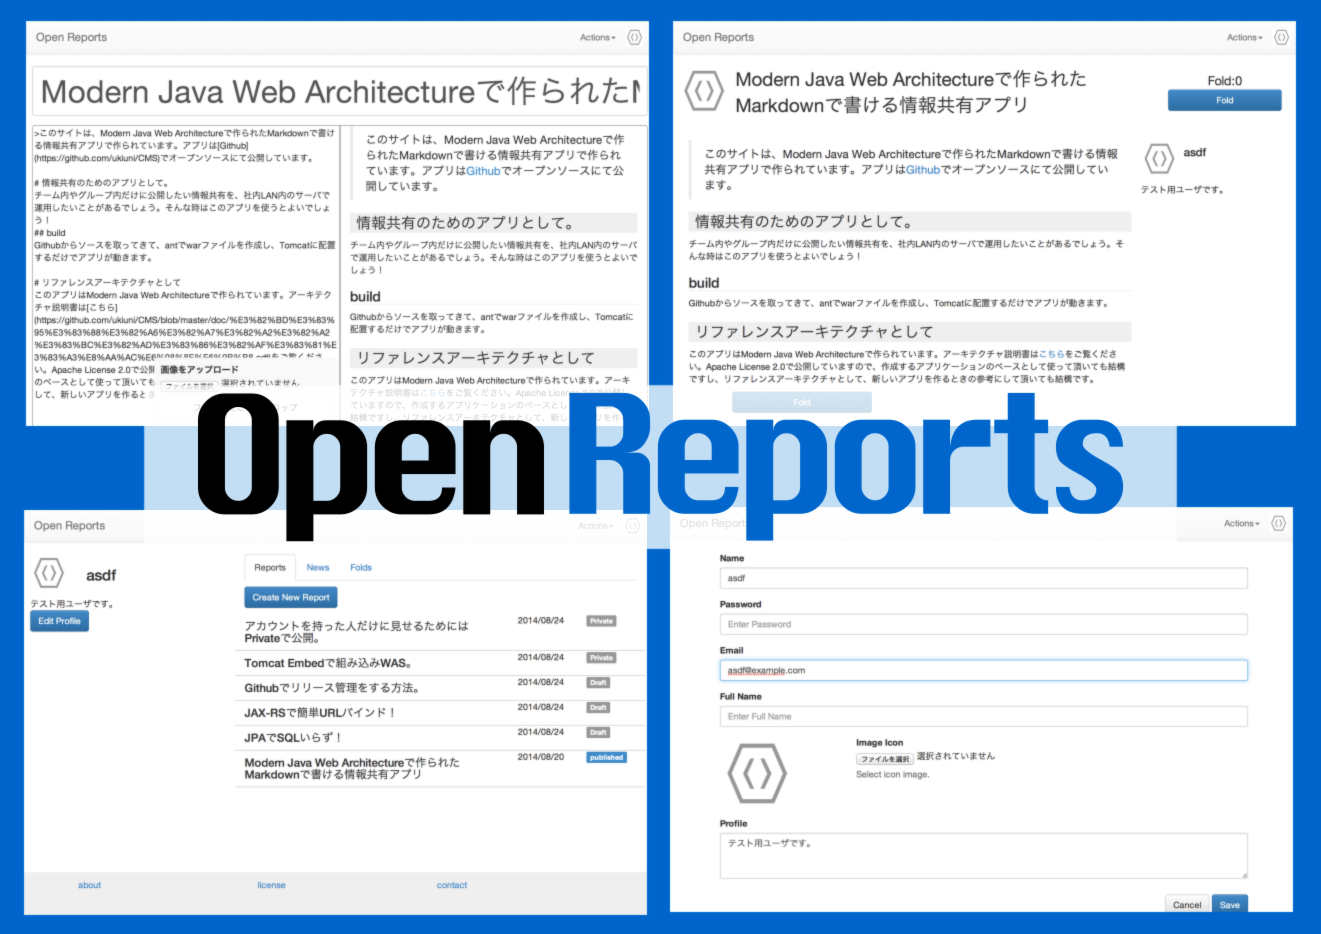 openreports_items.png